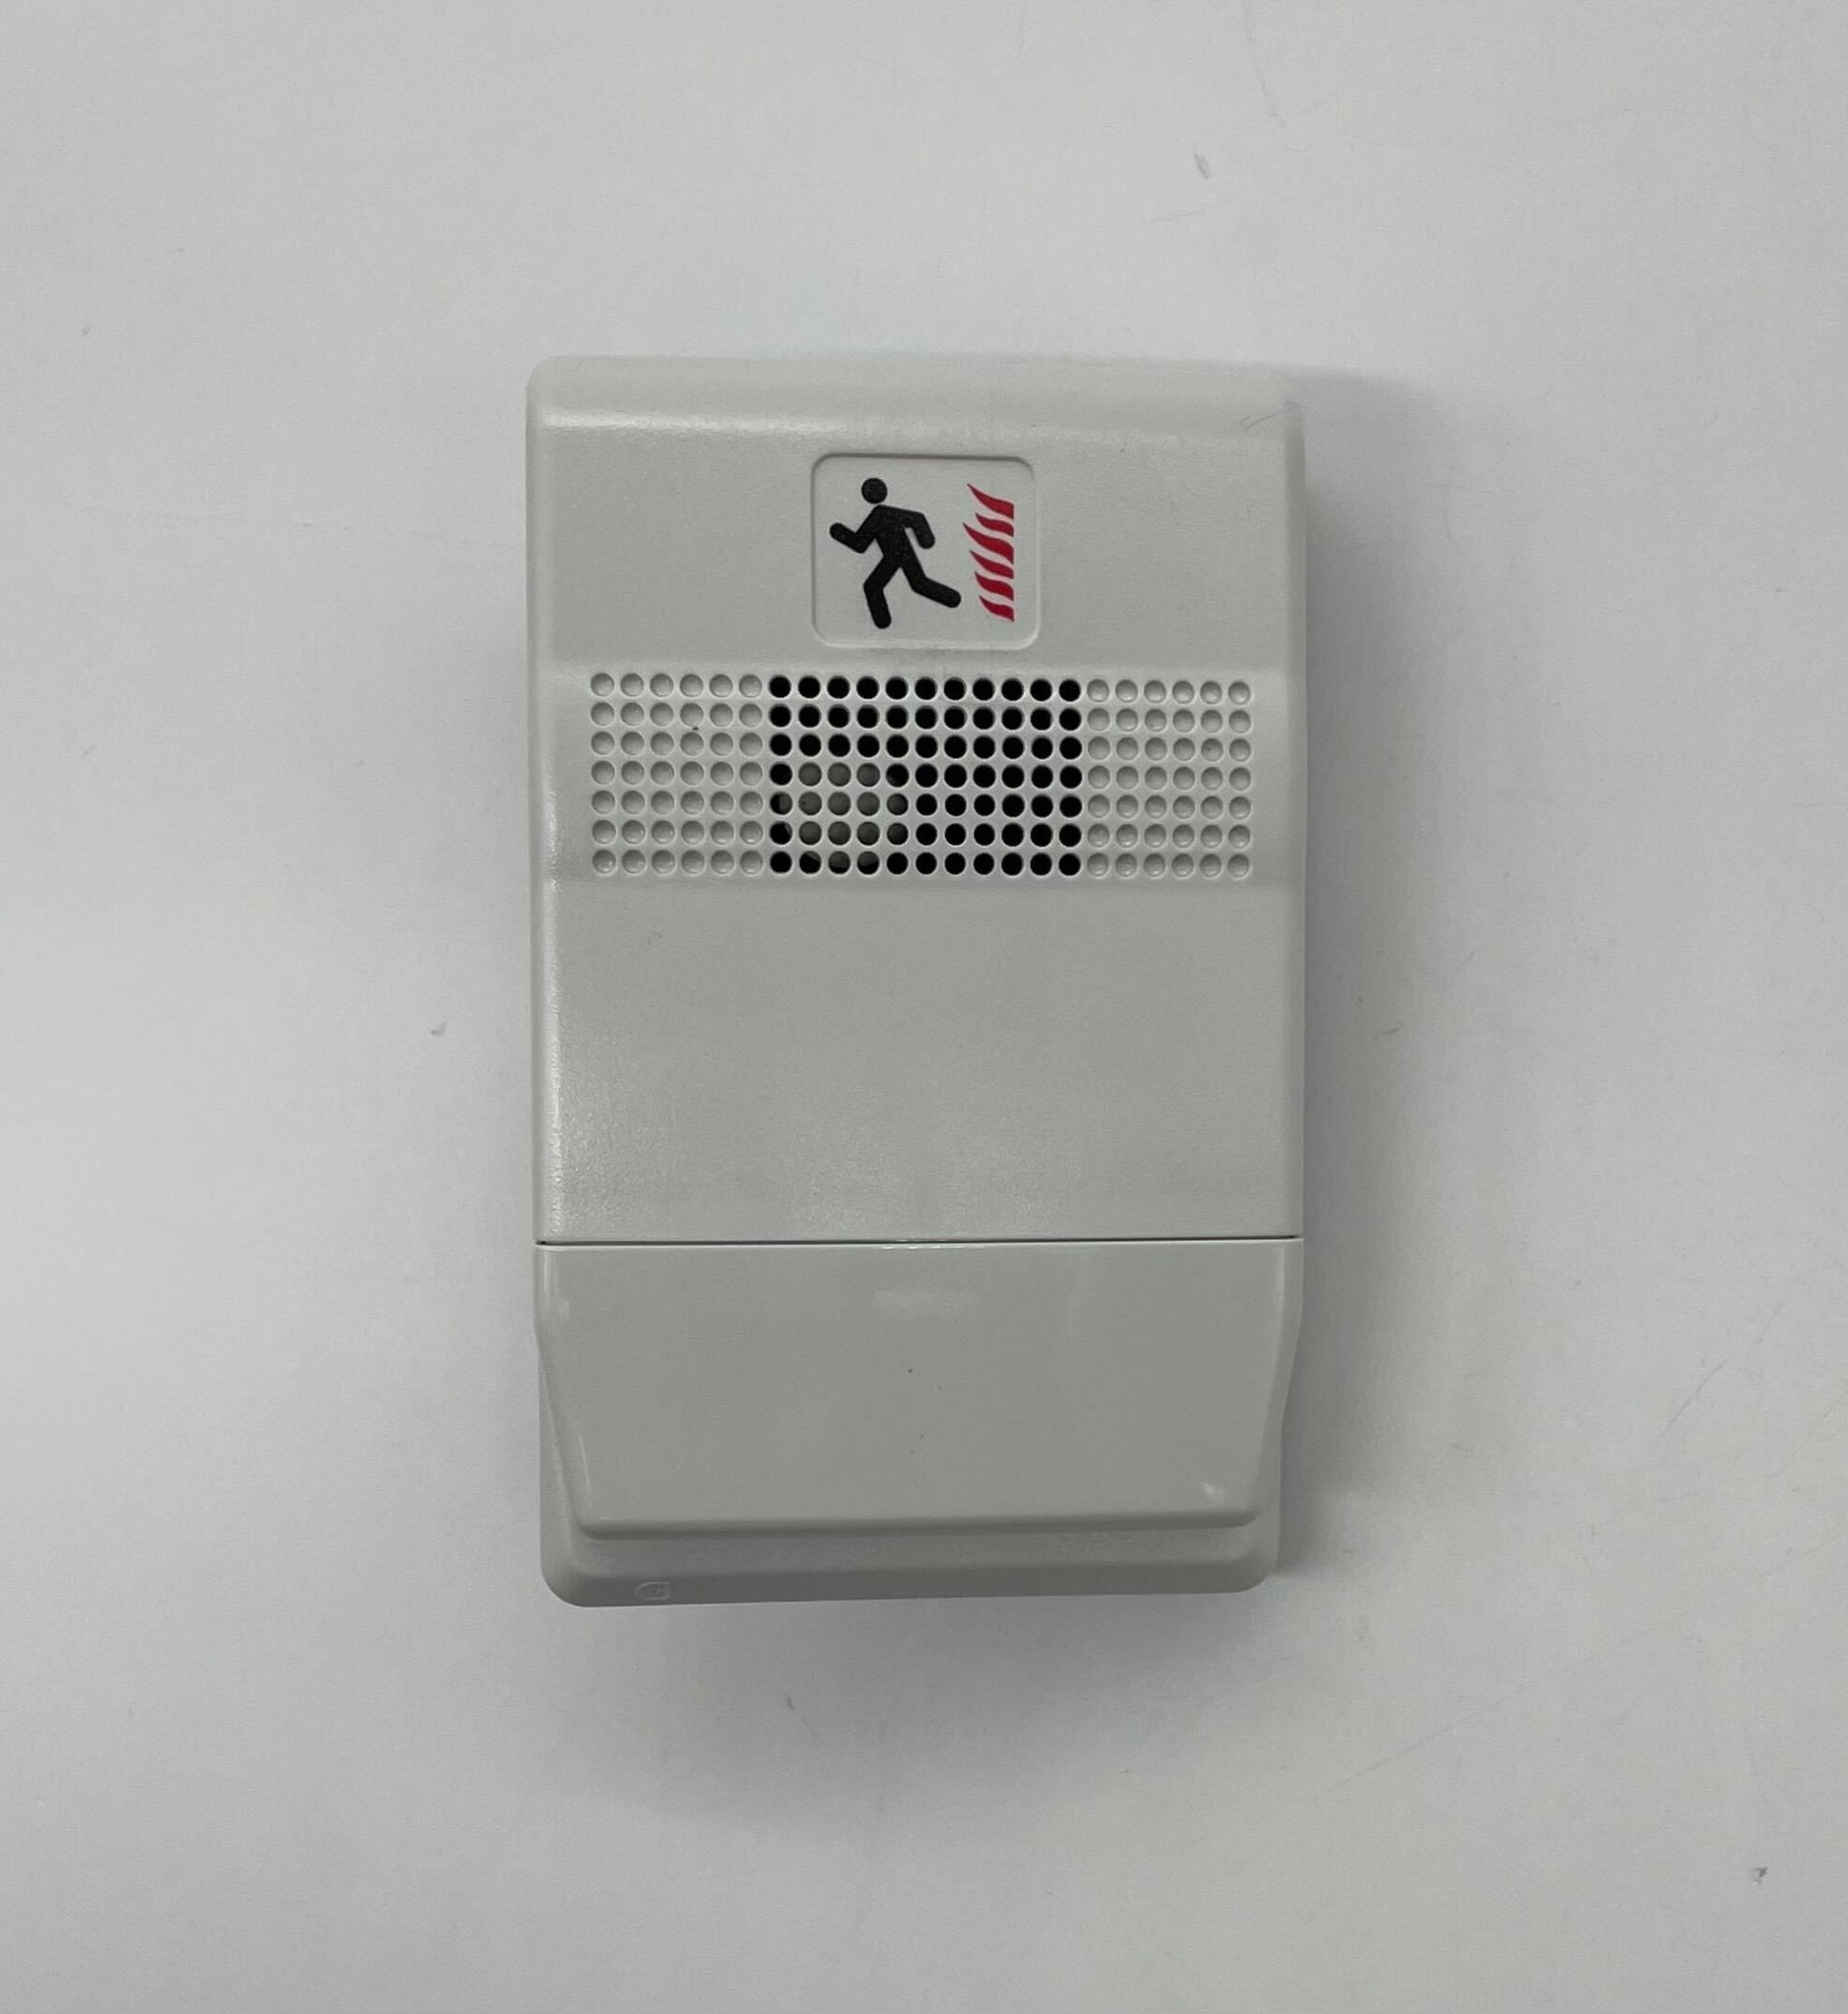 Edwards G1-HD - The Fire Alarm Supplier